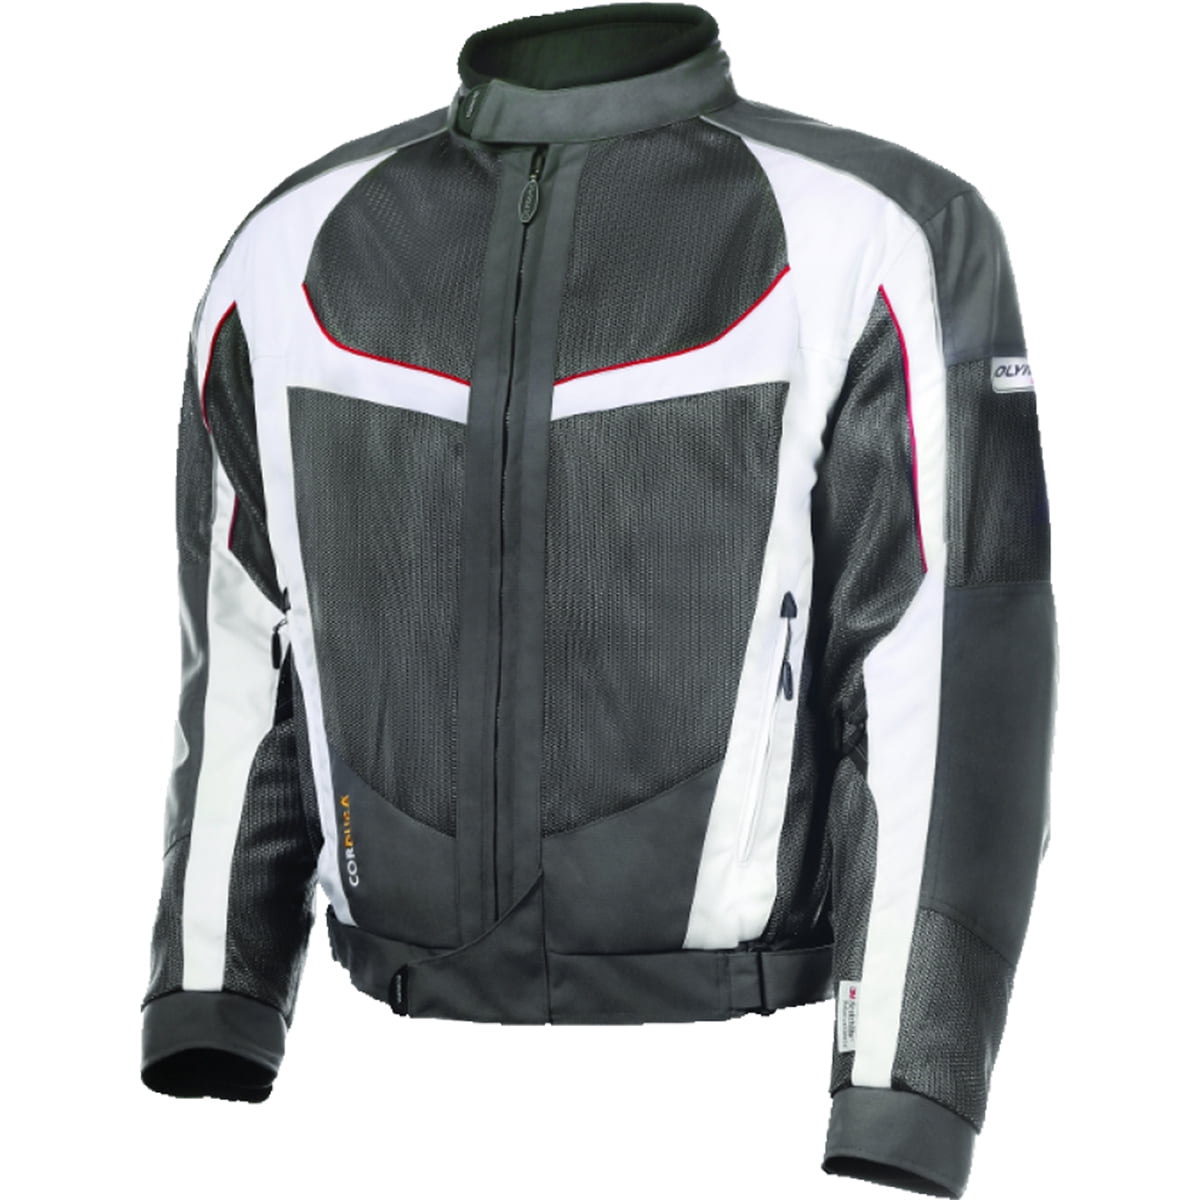 Olympia Switchback 2 Men's Off-Road Motorcycle Jackets - Walmart.com